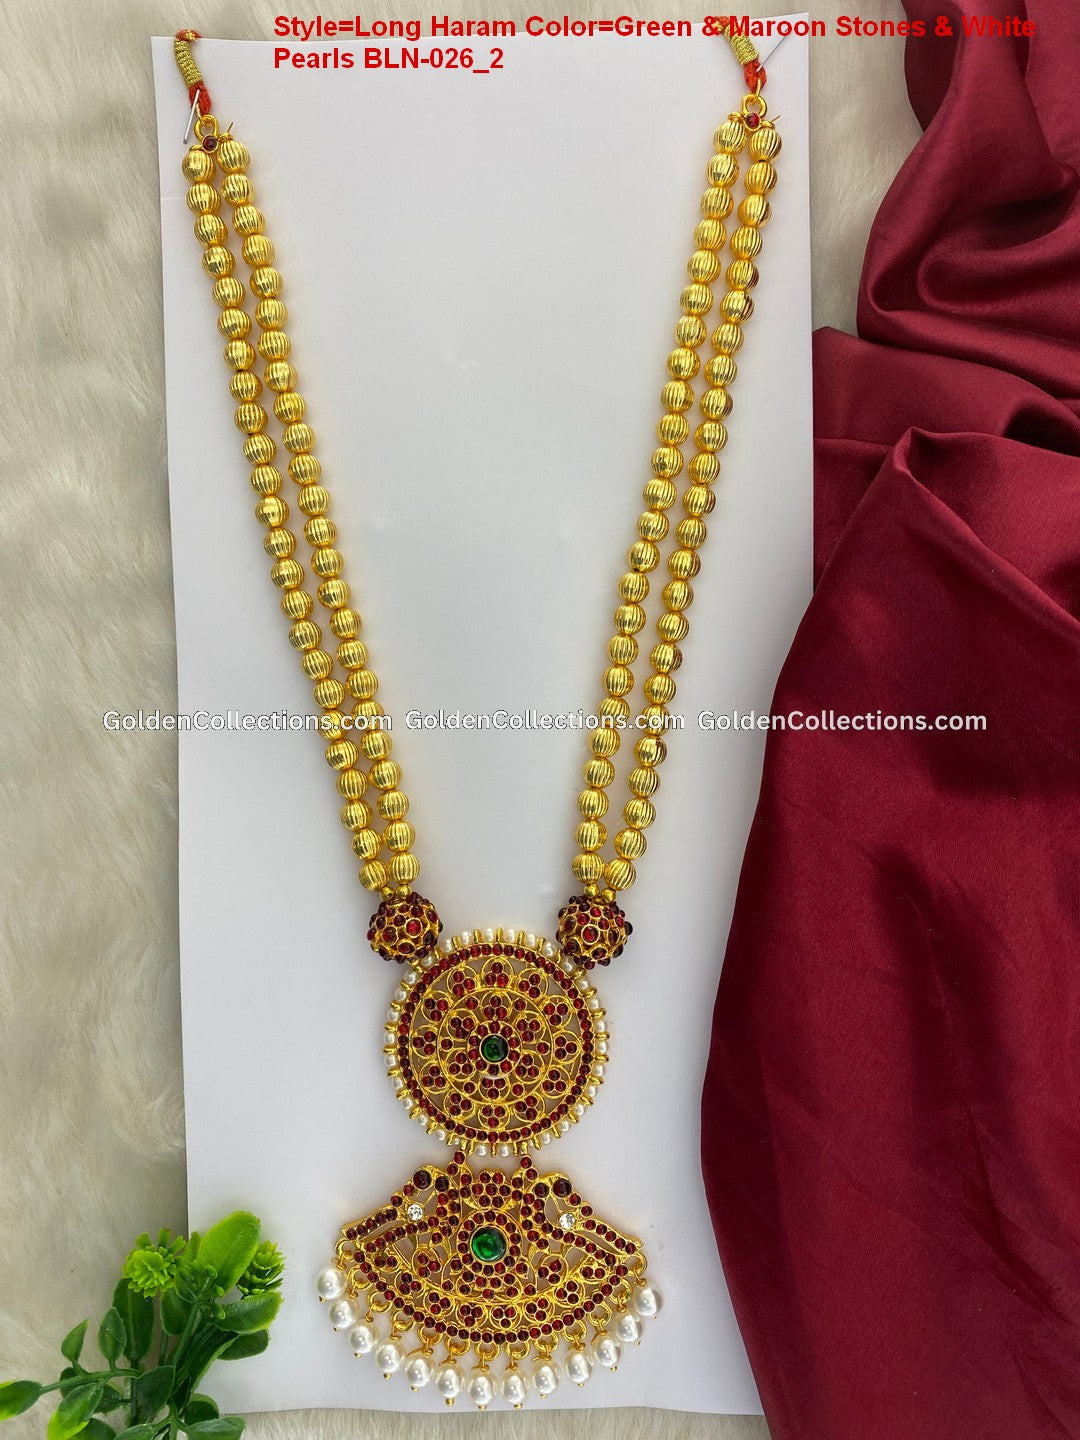 Long Necklace - Traditional Elegance for Your Performance BLN-026 2